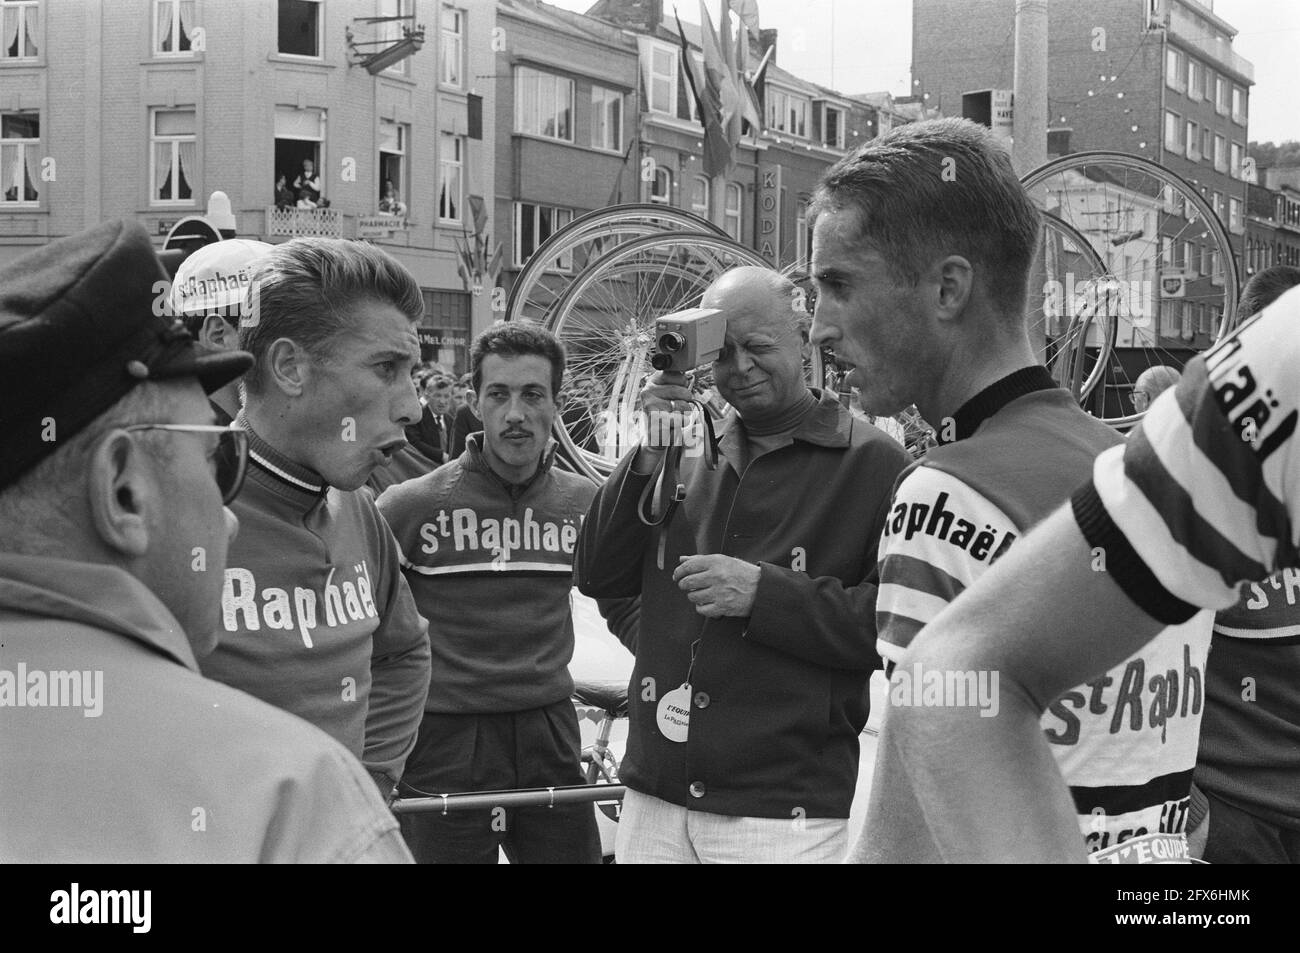 Ab Geldermans and Jacques Anquetil, Tour de France 1963, The Netherlands, 20th century press agency photo, news to remember, documentary, historic photography 1945-1990, visual stories, human history of the Twentieth Century, capturing moments in time Stock Photo